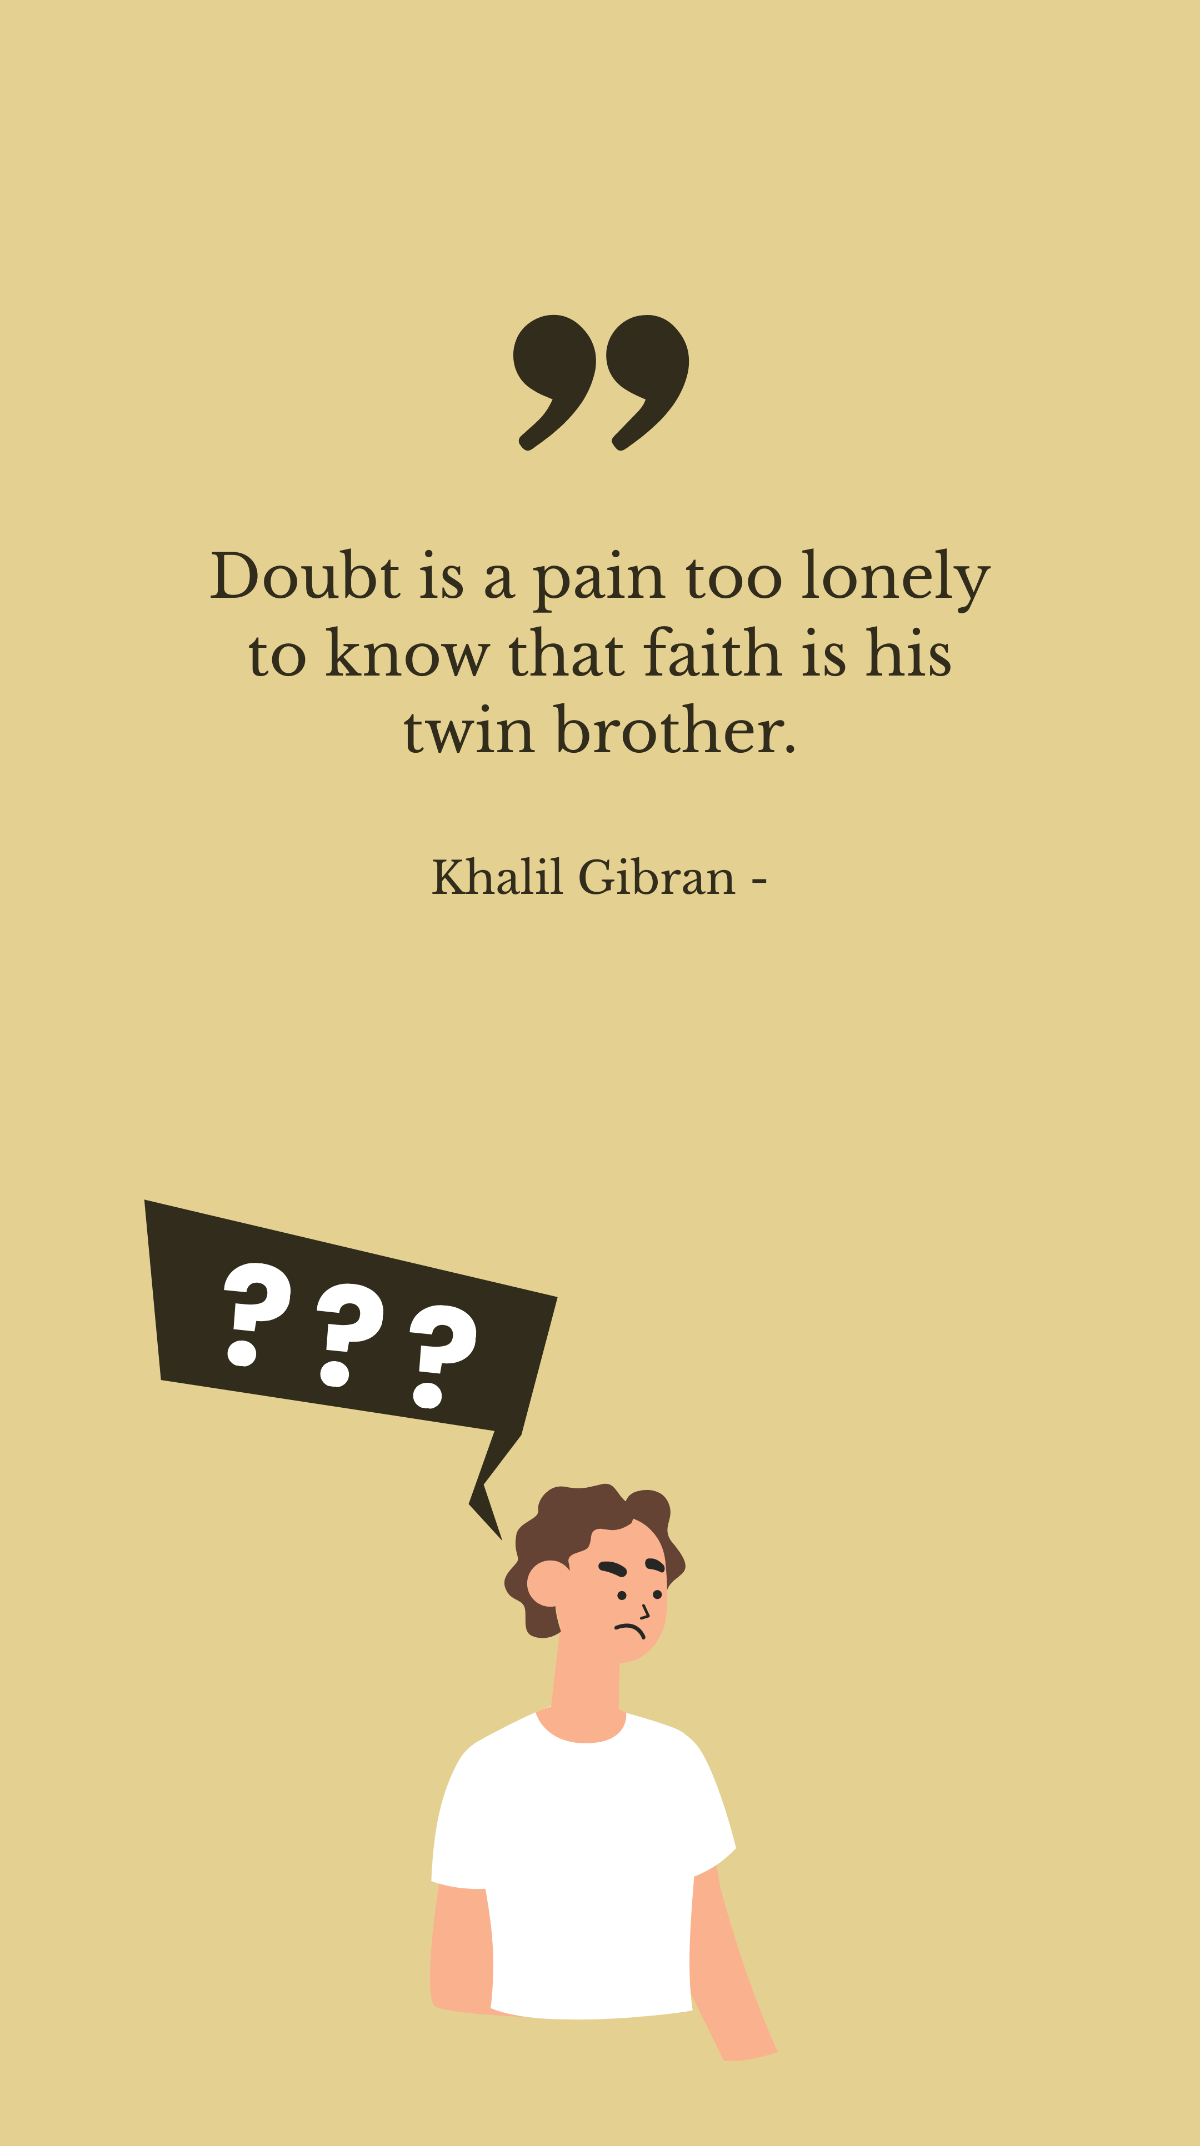 Khalil Gibran - Doubt is a pain too lonely to know that faith is his twin brother.